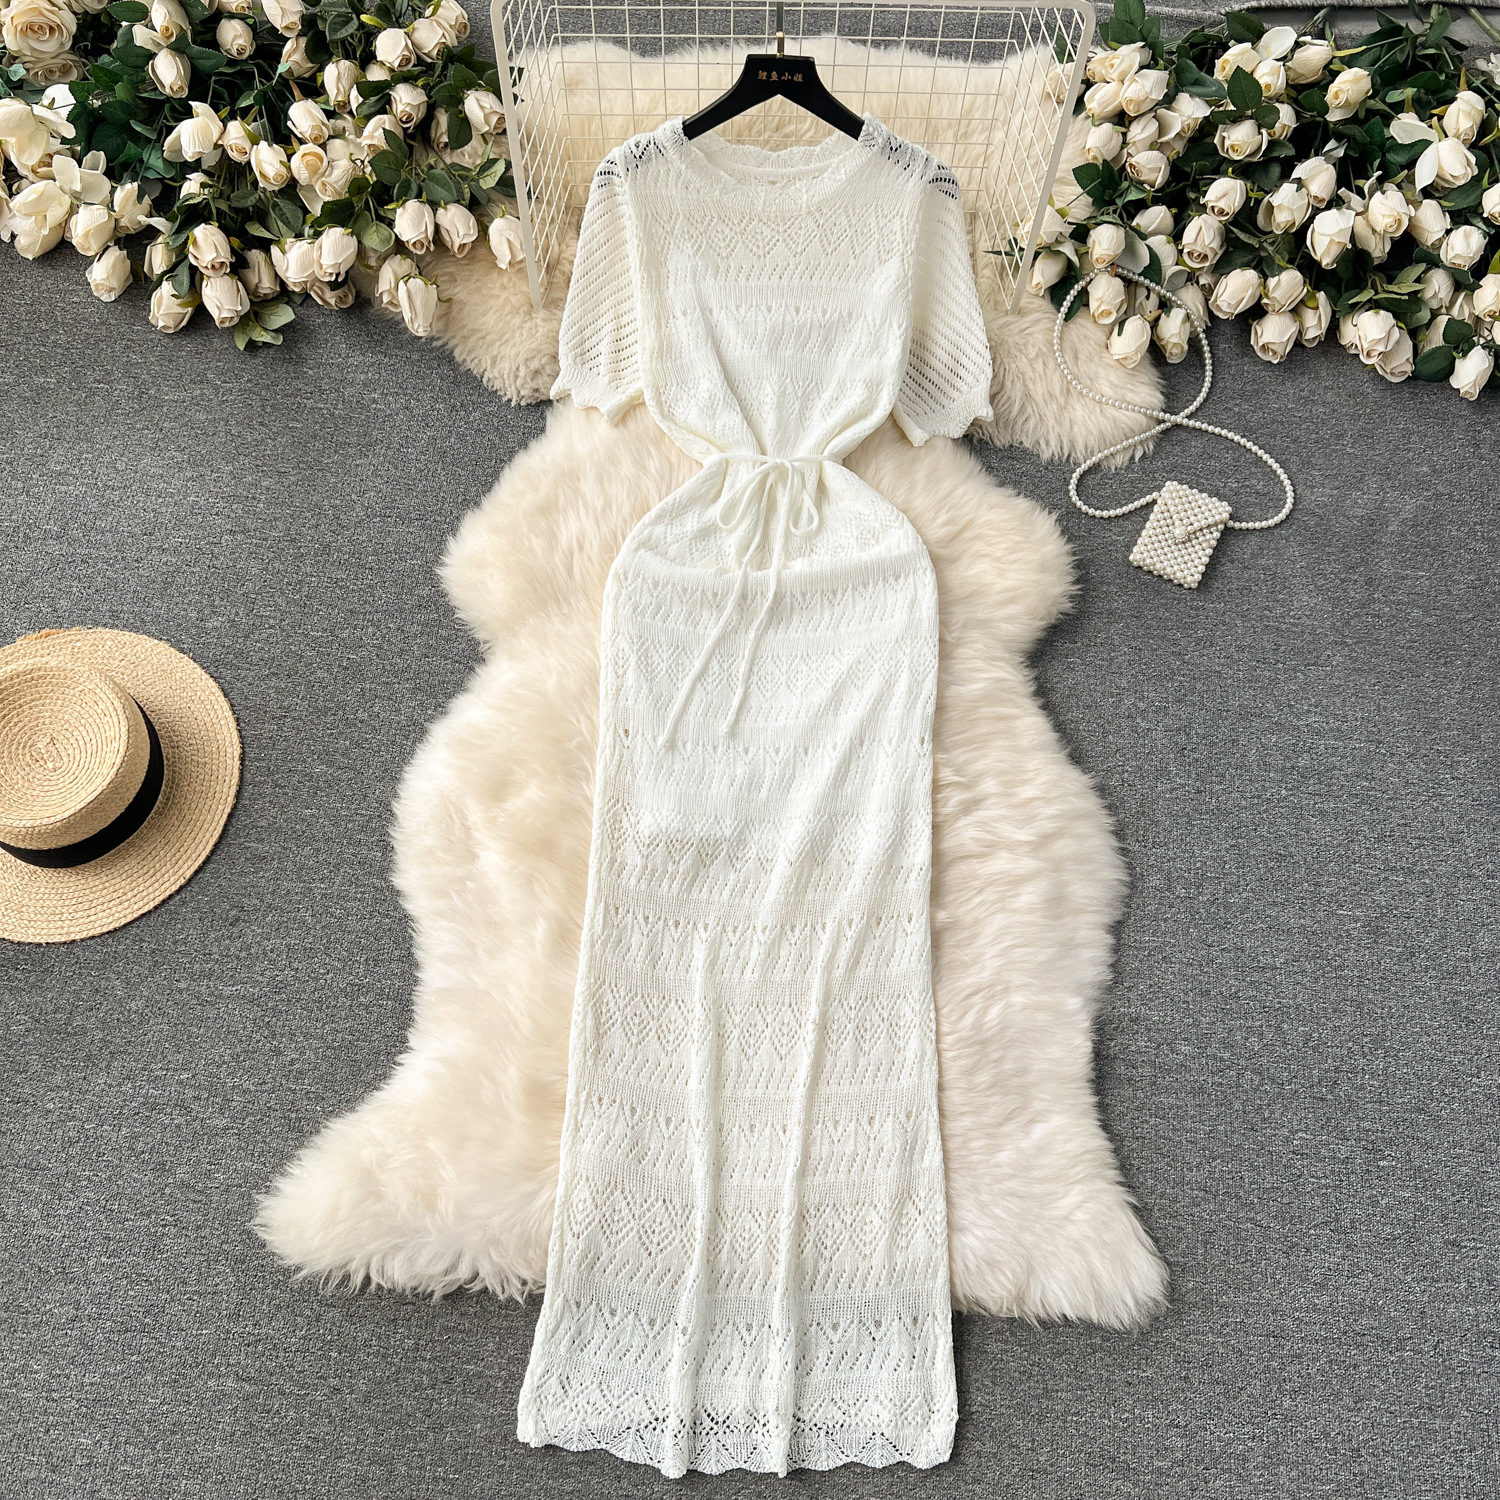 French gentle style temperament dress for women with reduced age bubble sleeves design, hook flower hollowed out knitted long skirt with suspender